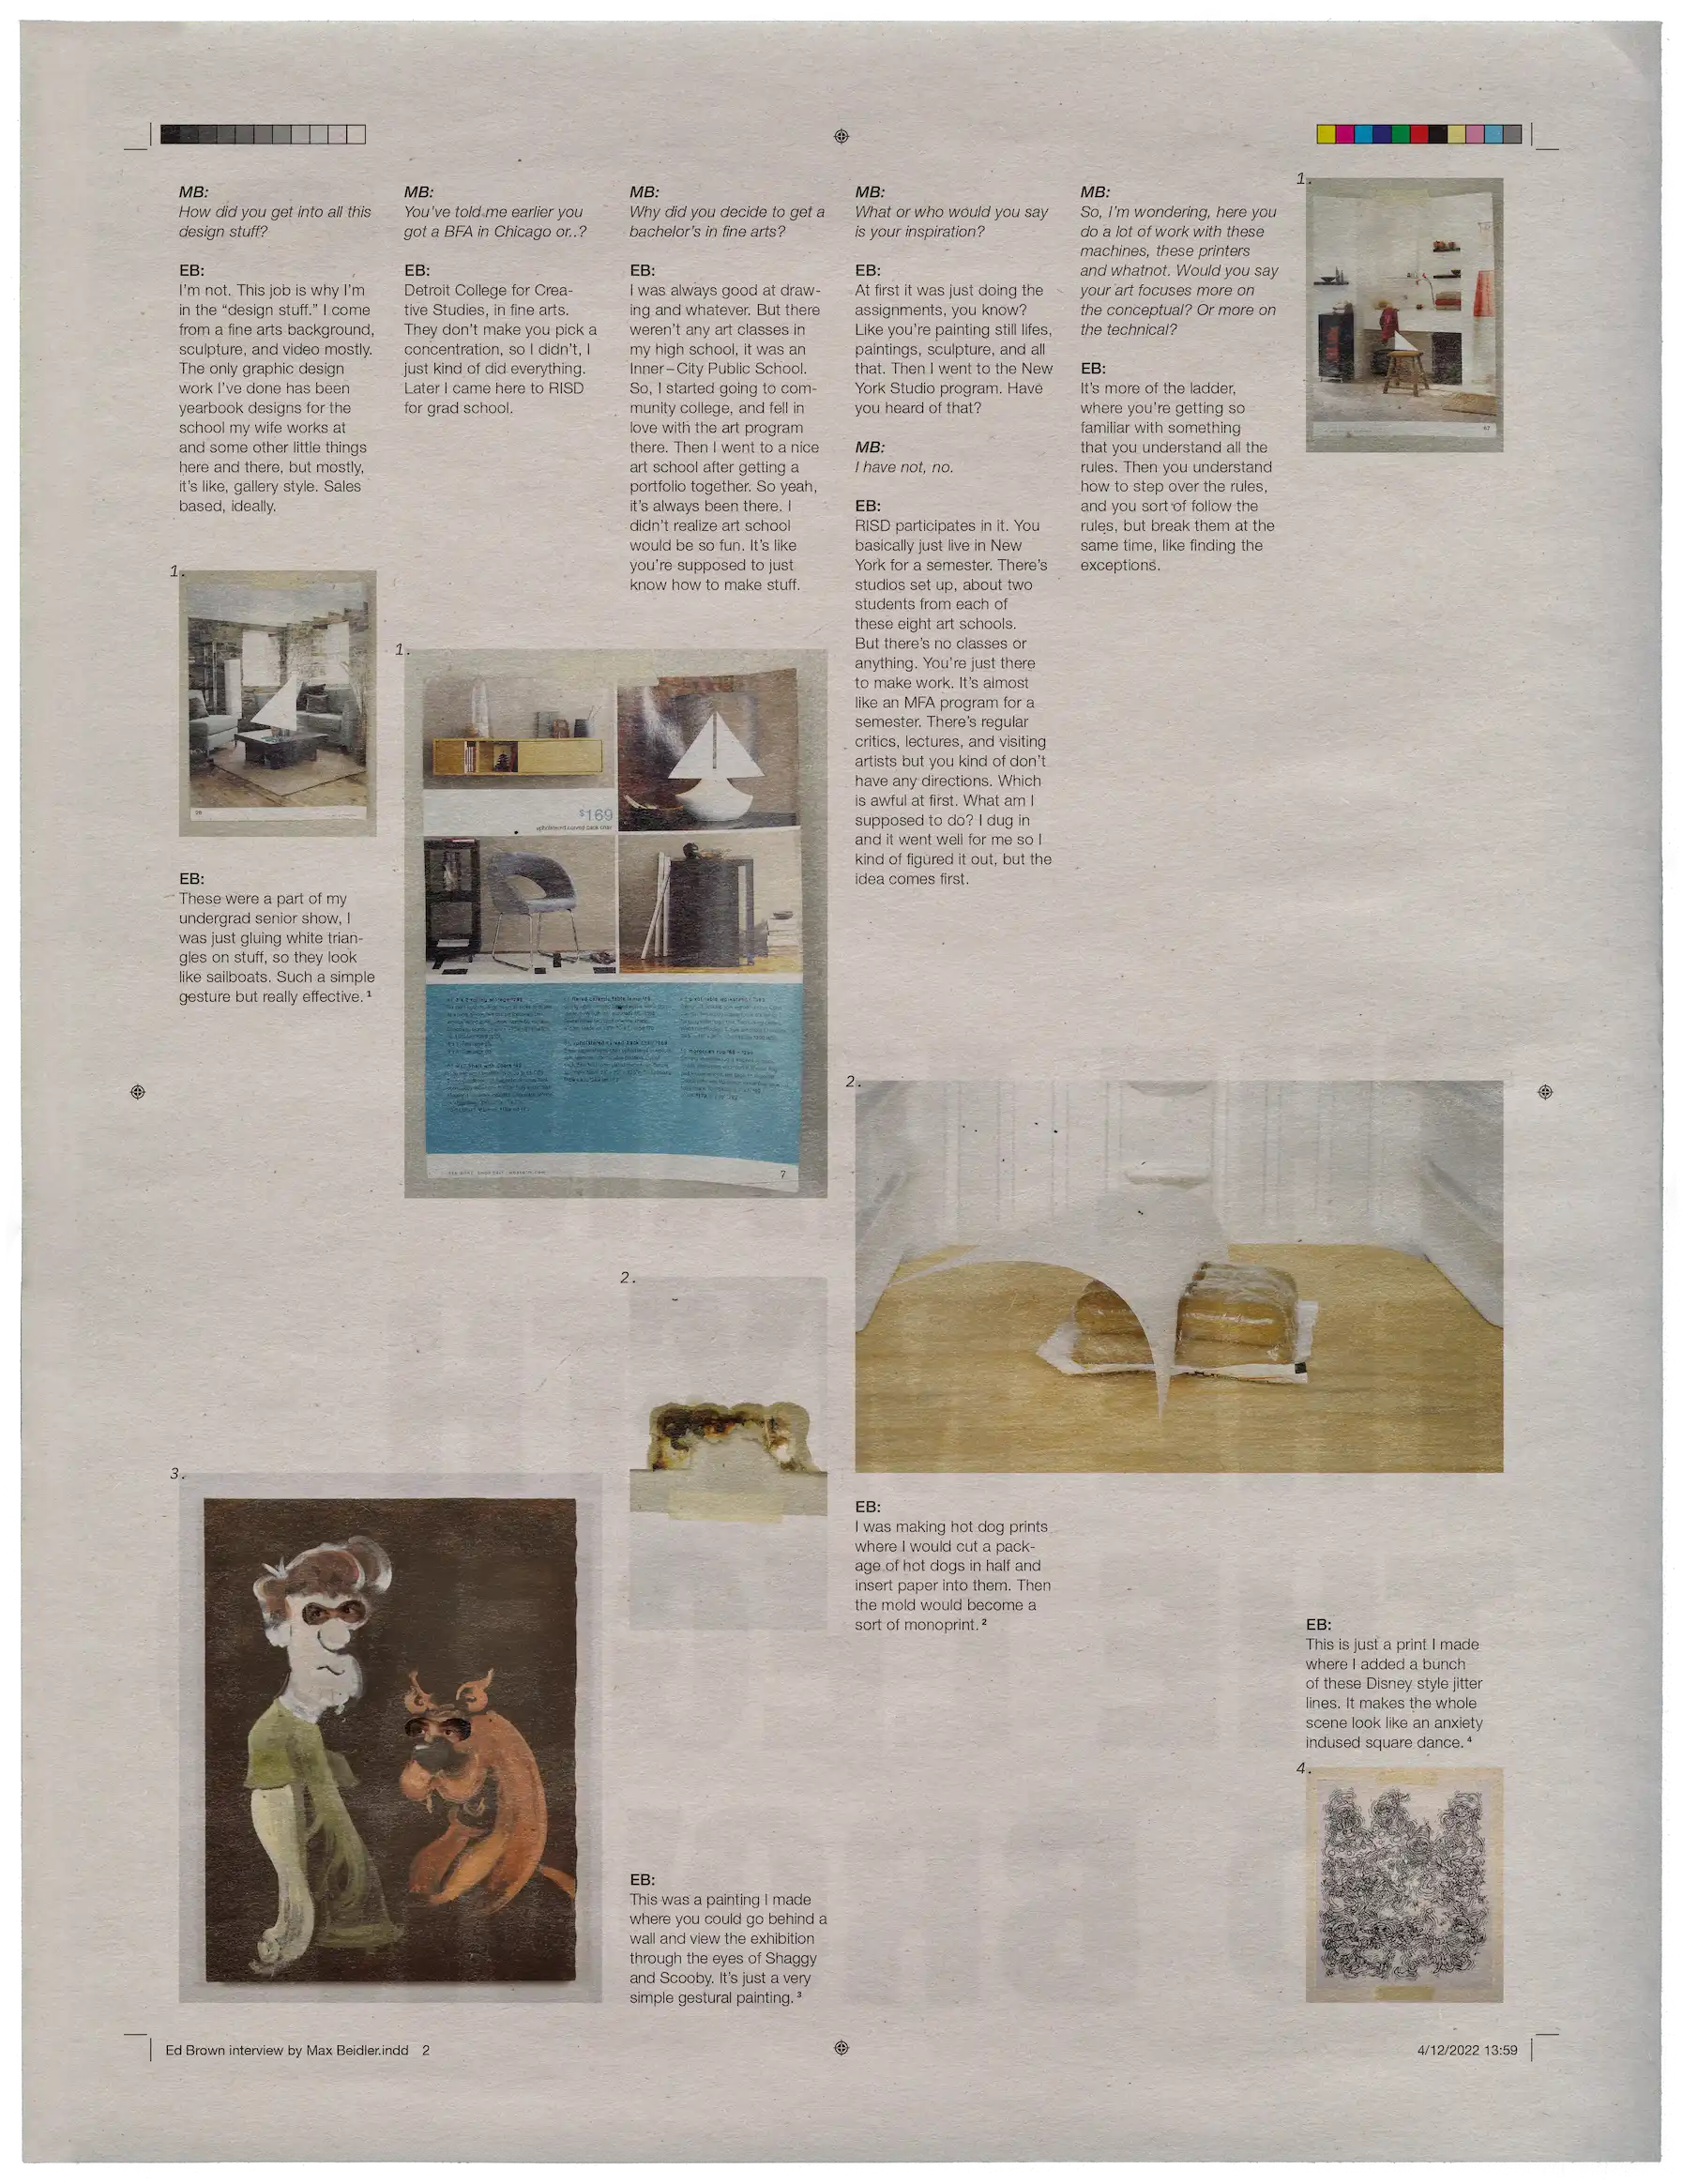 The second cover/page of the printed interview.